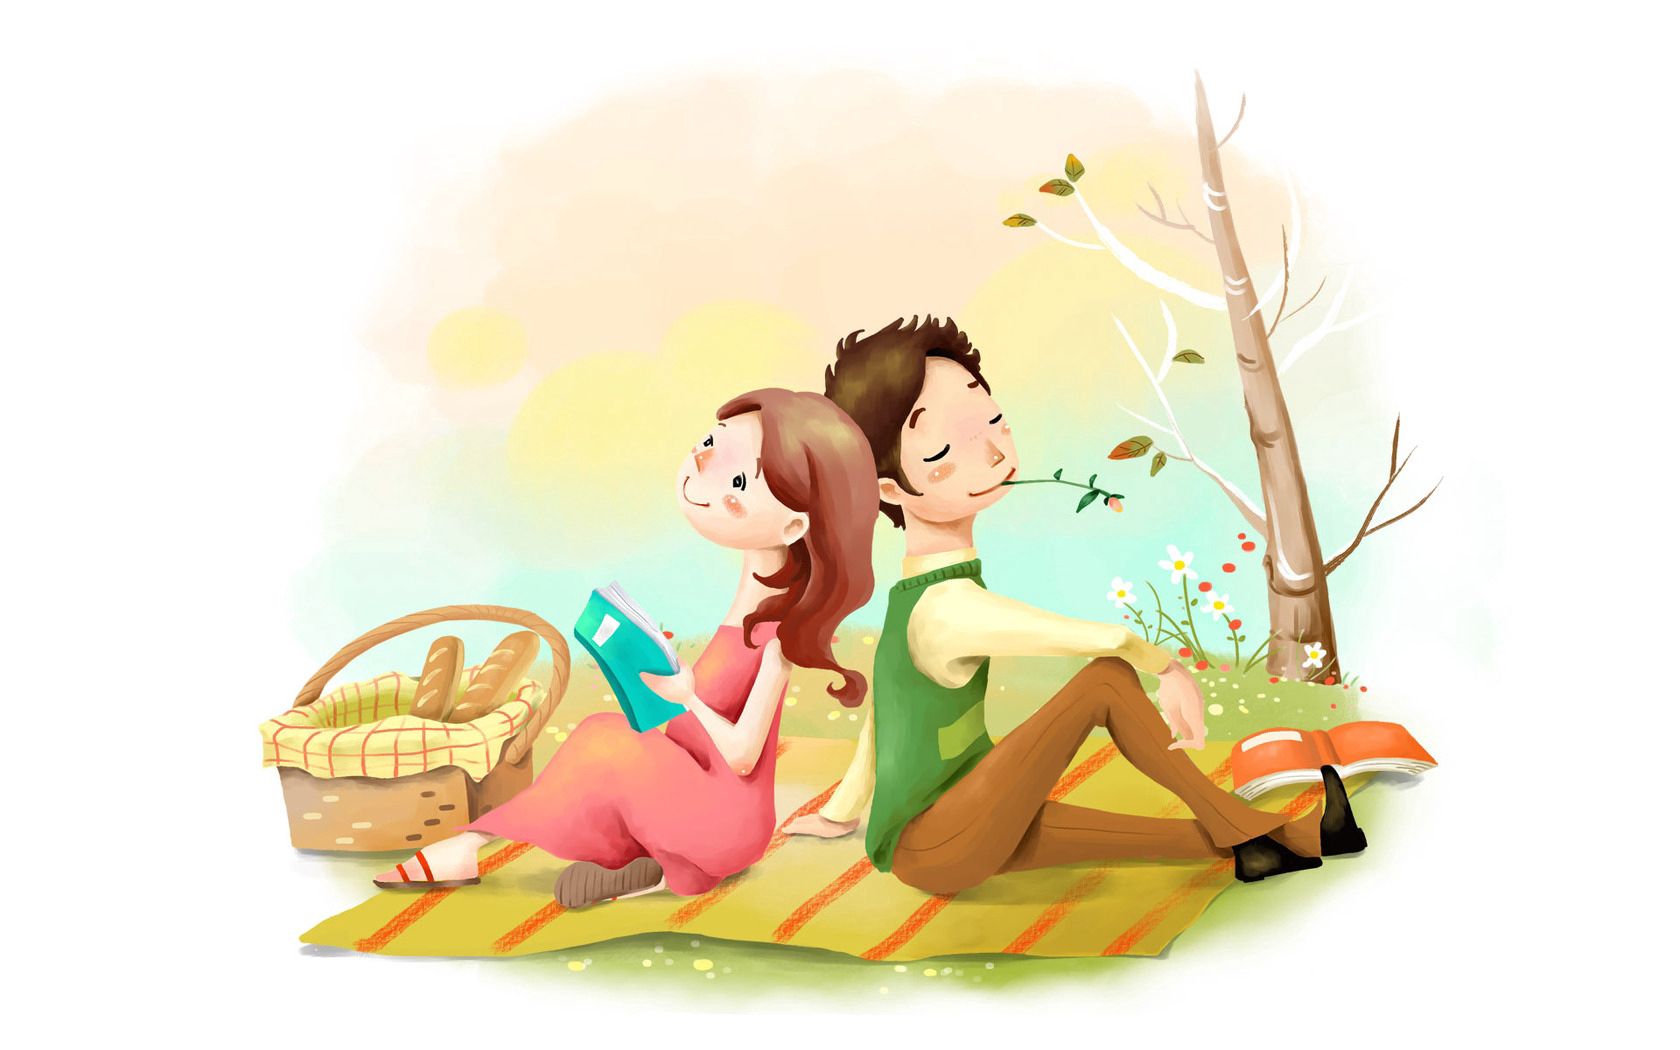 drawing, flowers, love, picture, girl, basket, lawn, positive, guy, bread, picnic, reverie, dreaminess